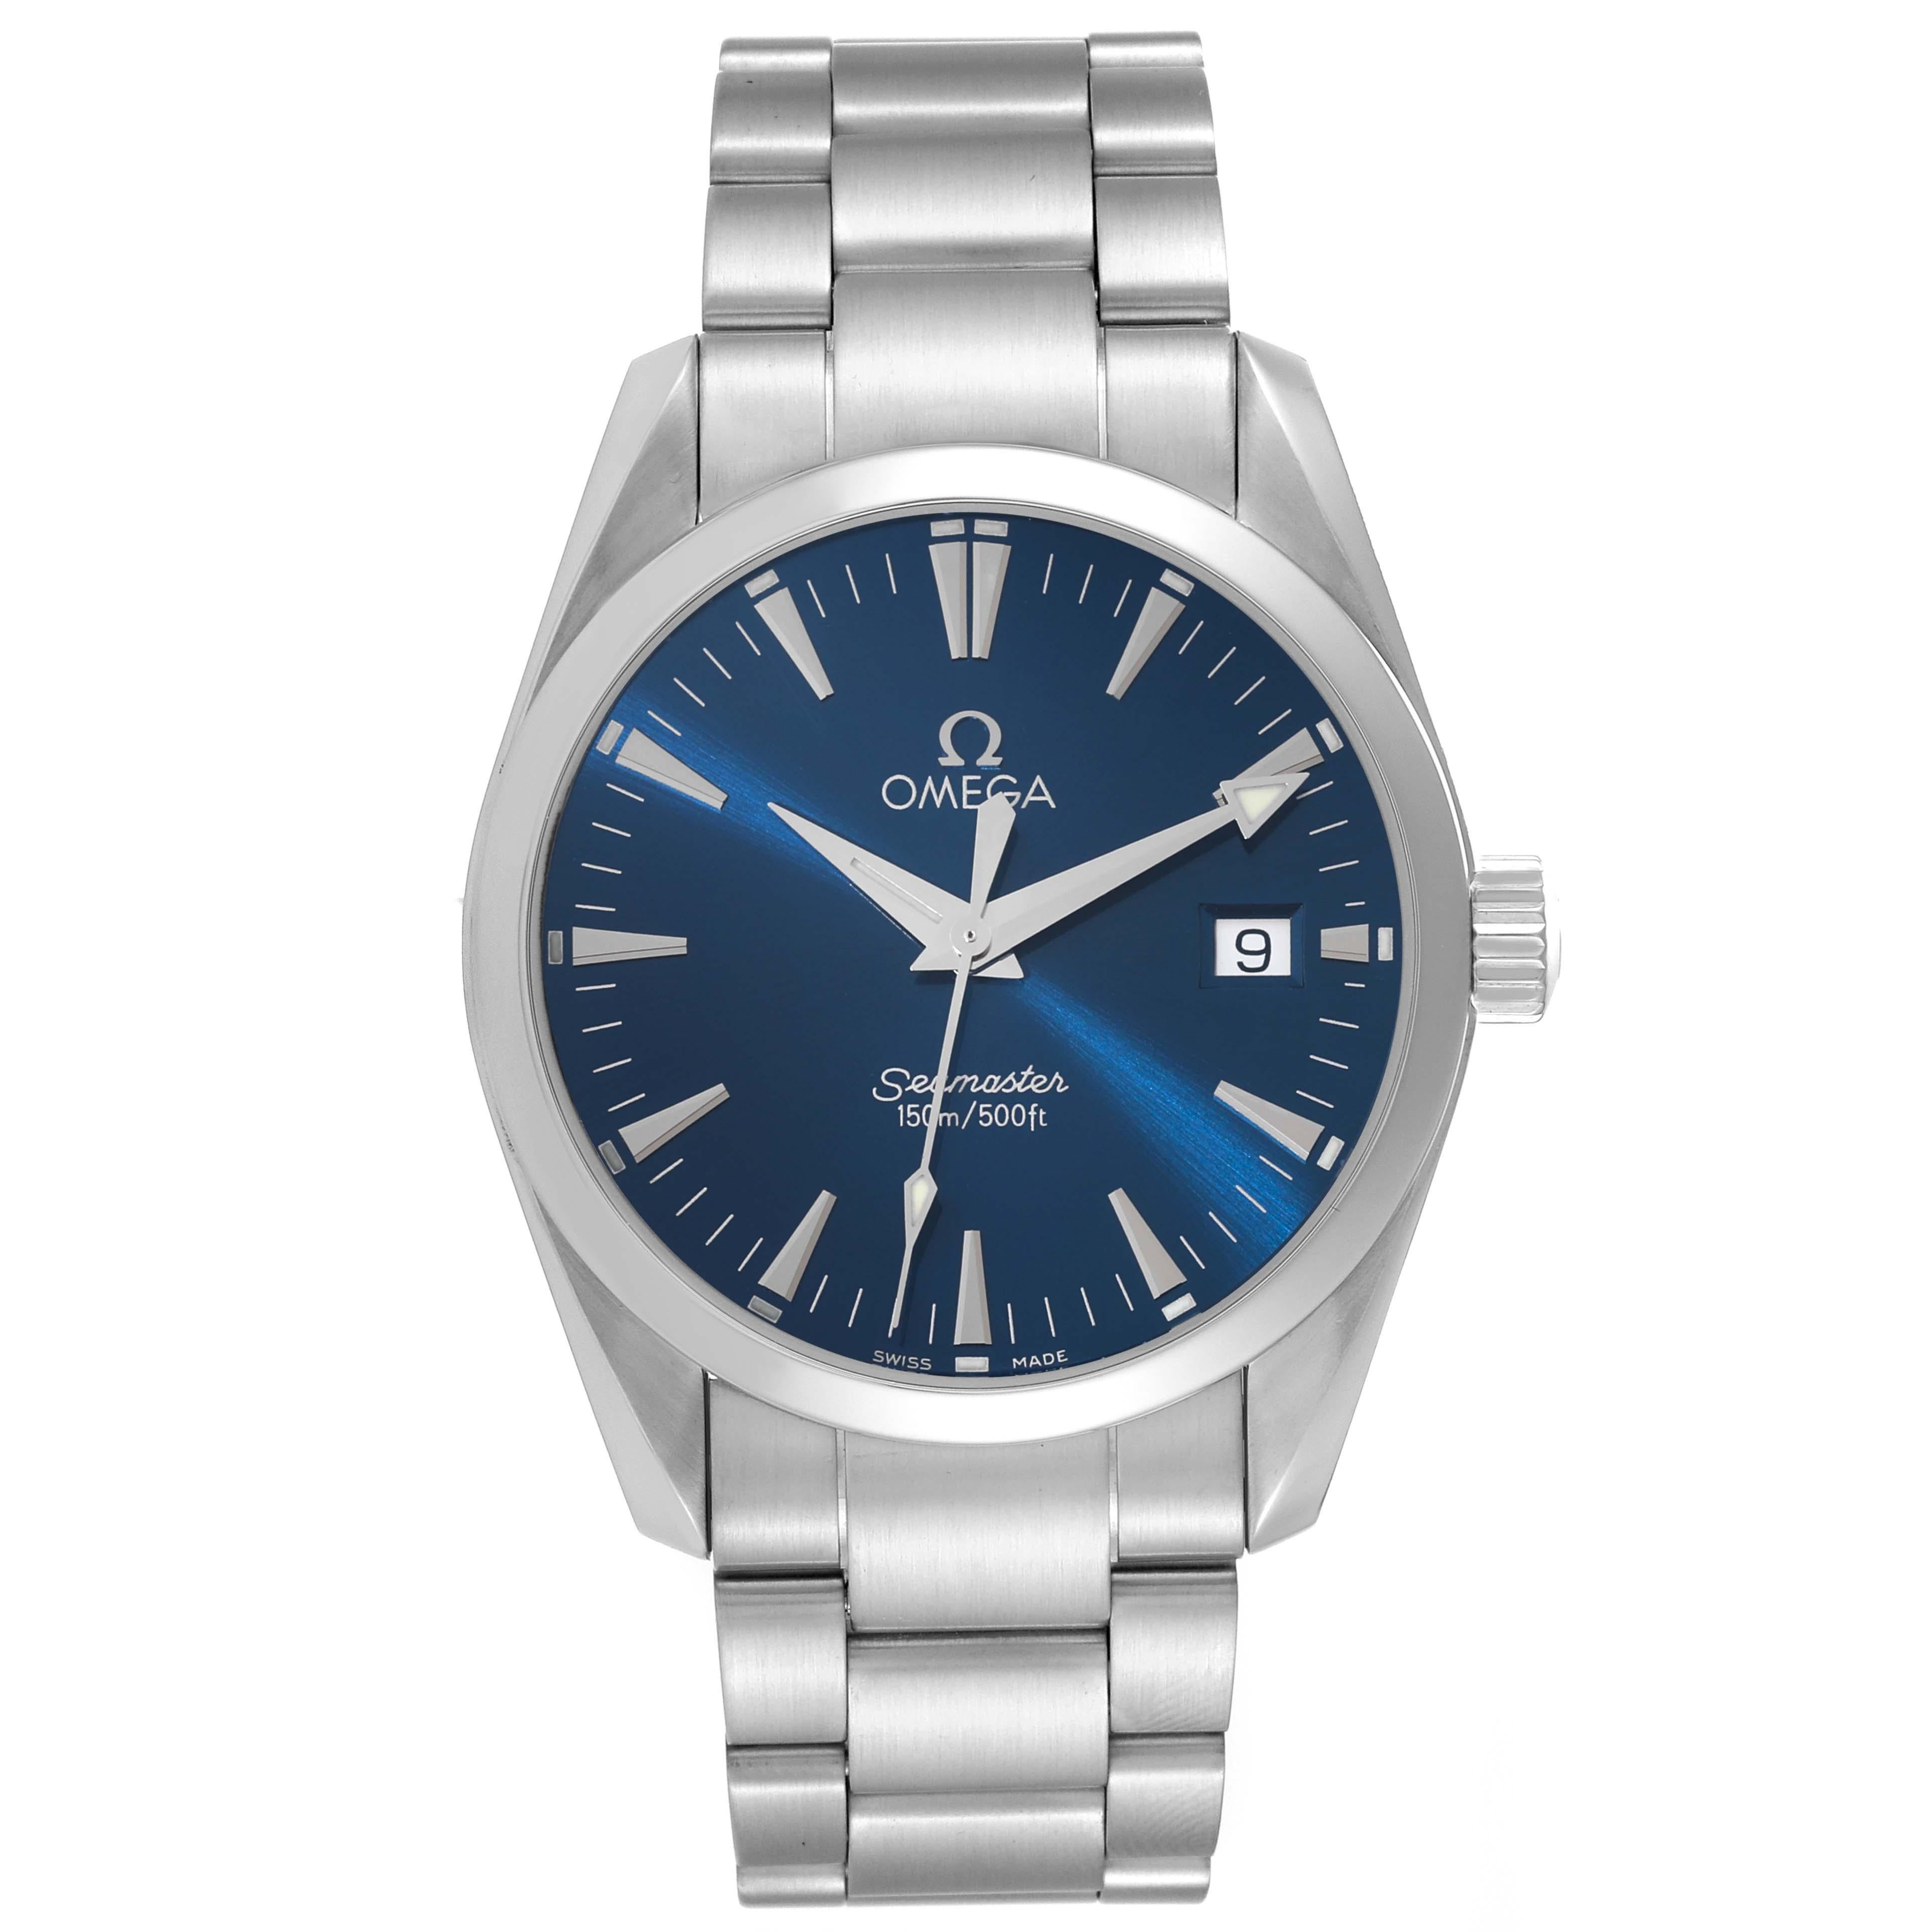 Omega Seamaster Date Aqua Terra Blue Dial Steel Mens Watch 2518.80.00. Quartz movement. Stainless steel round case 36.2 mm in diameter. Stainless steel smooth bezel. Scratch resistant sapphire crystal. Blue dial with raised index hour markers. Date